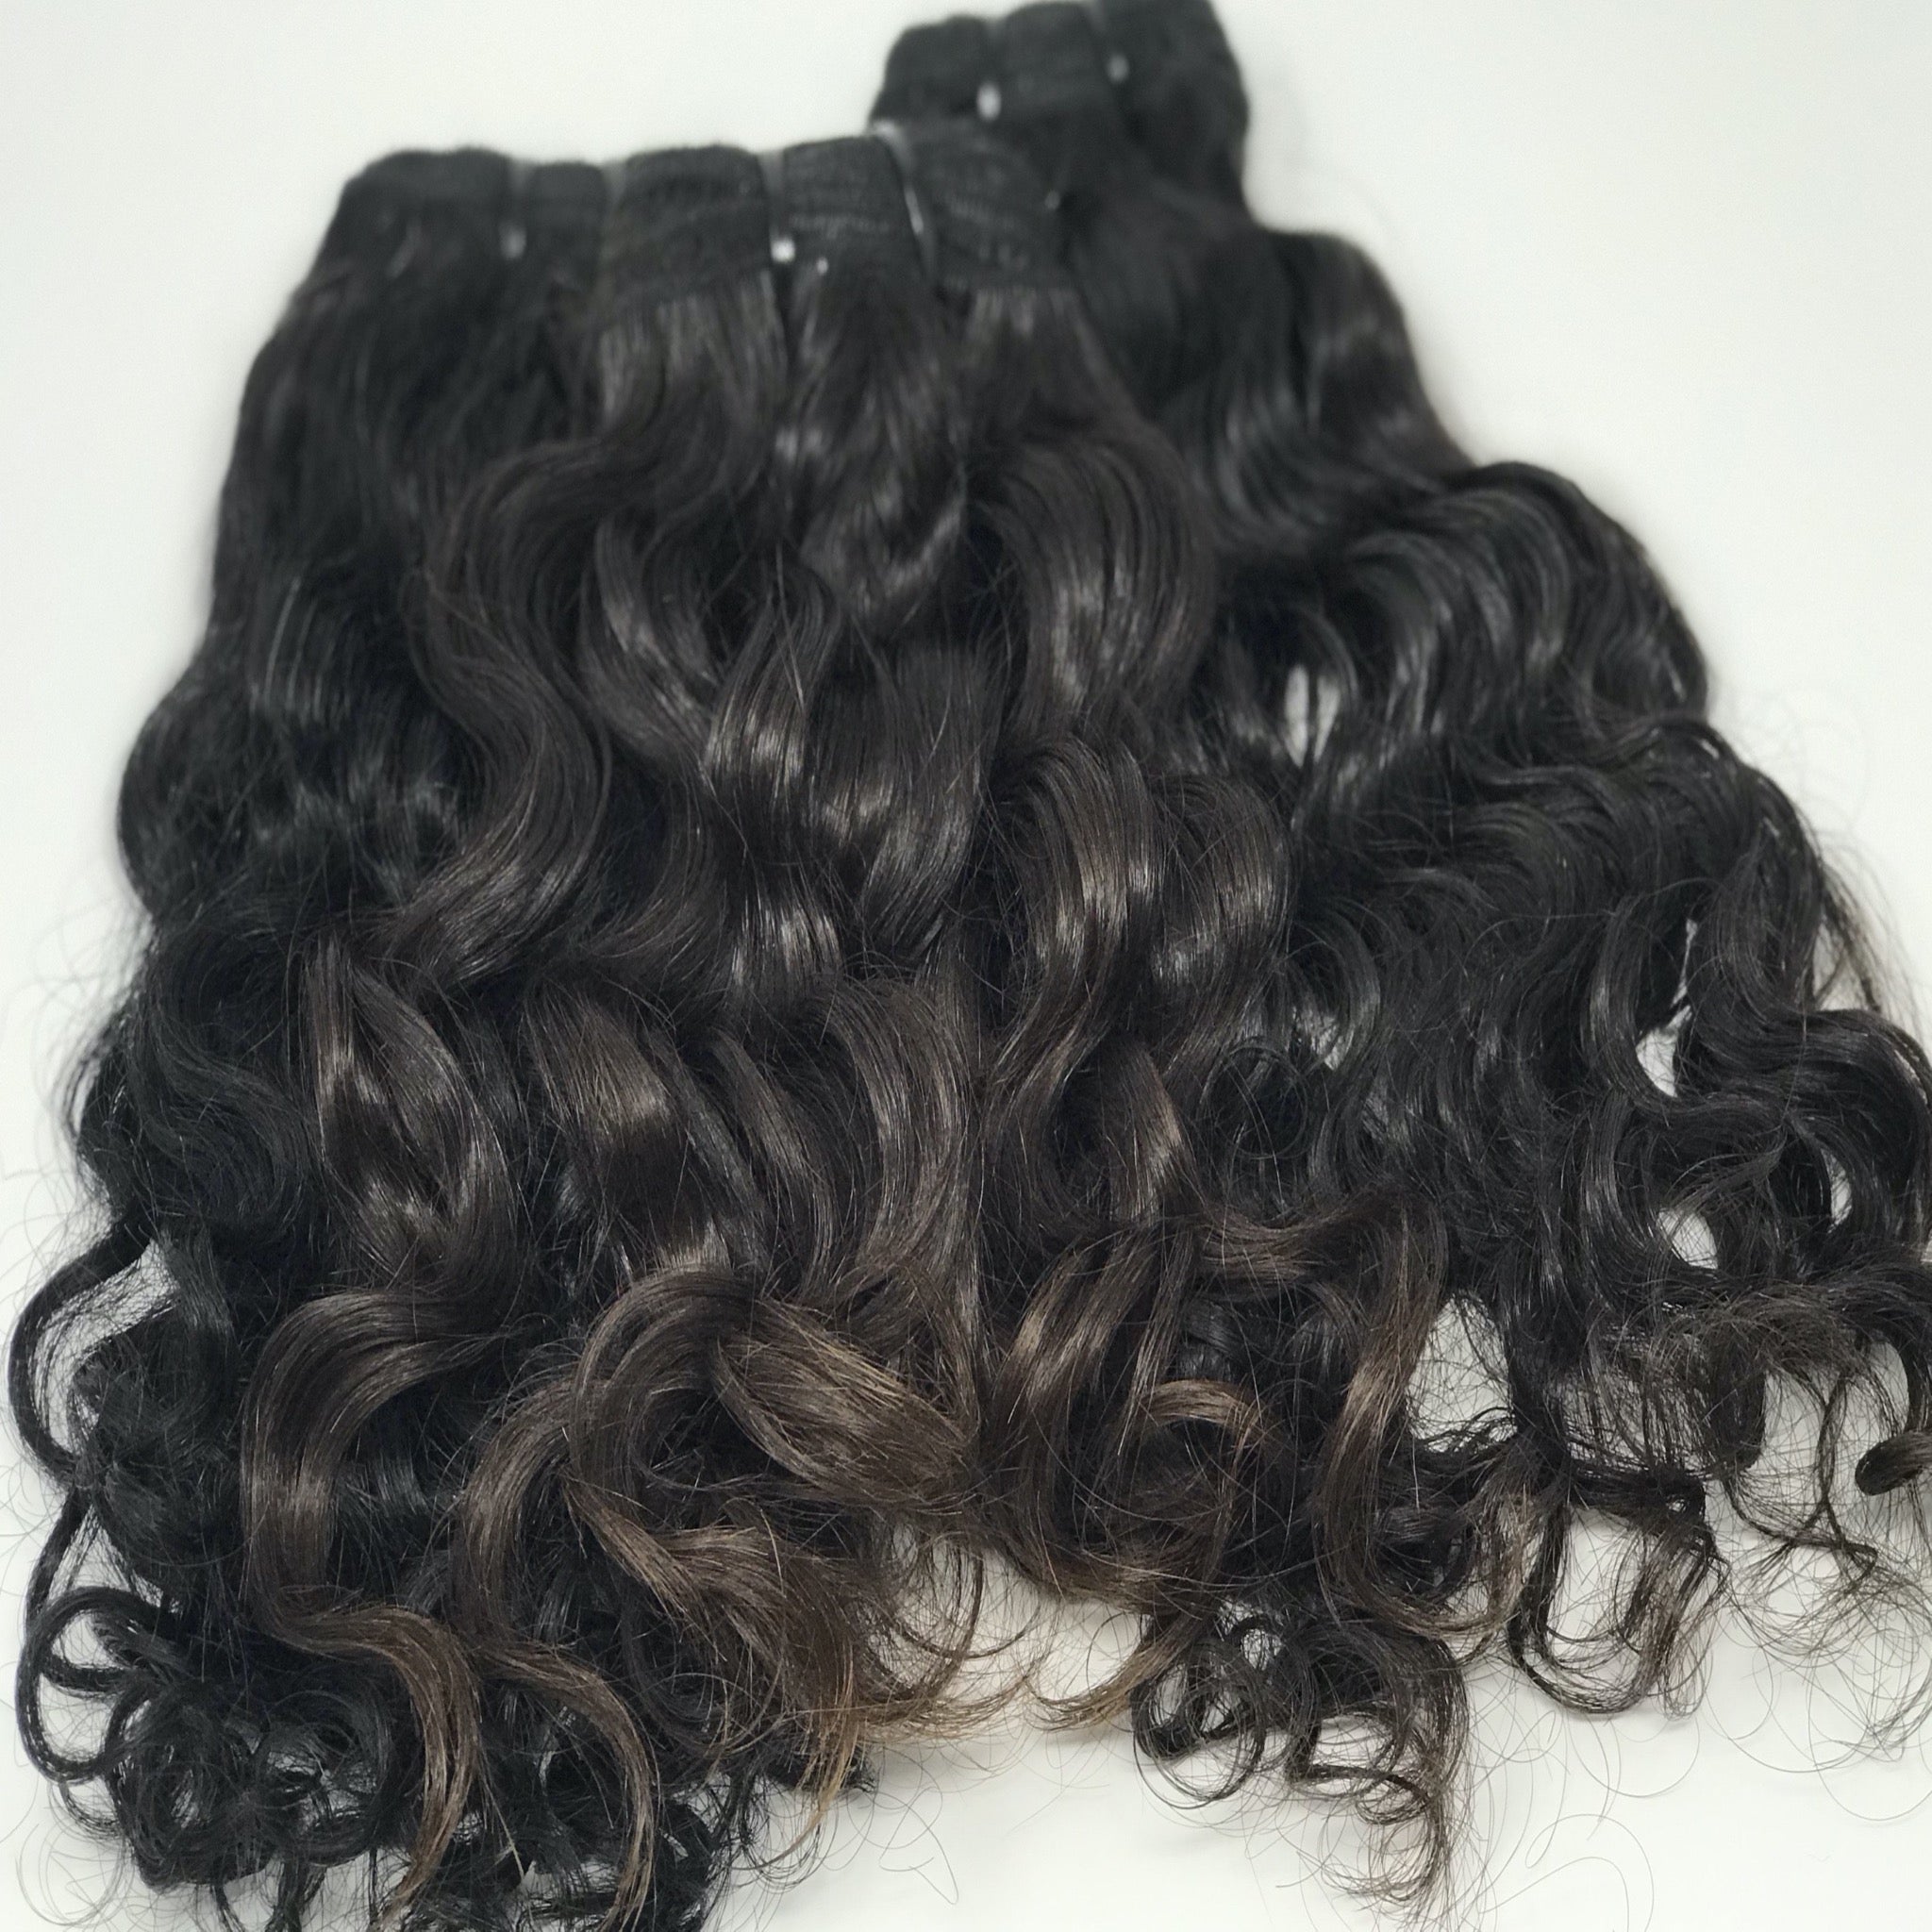 Raw Indian Temple Curly